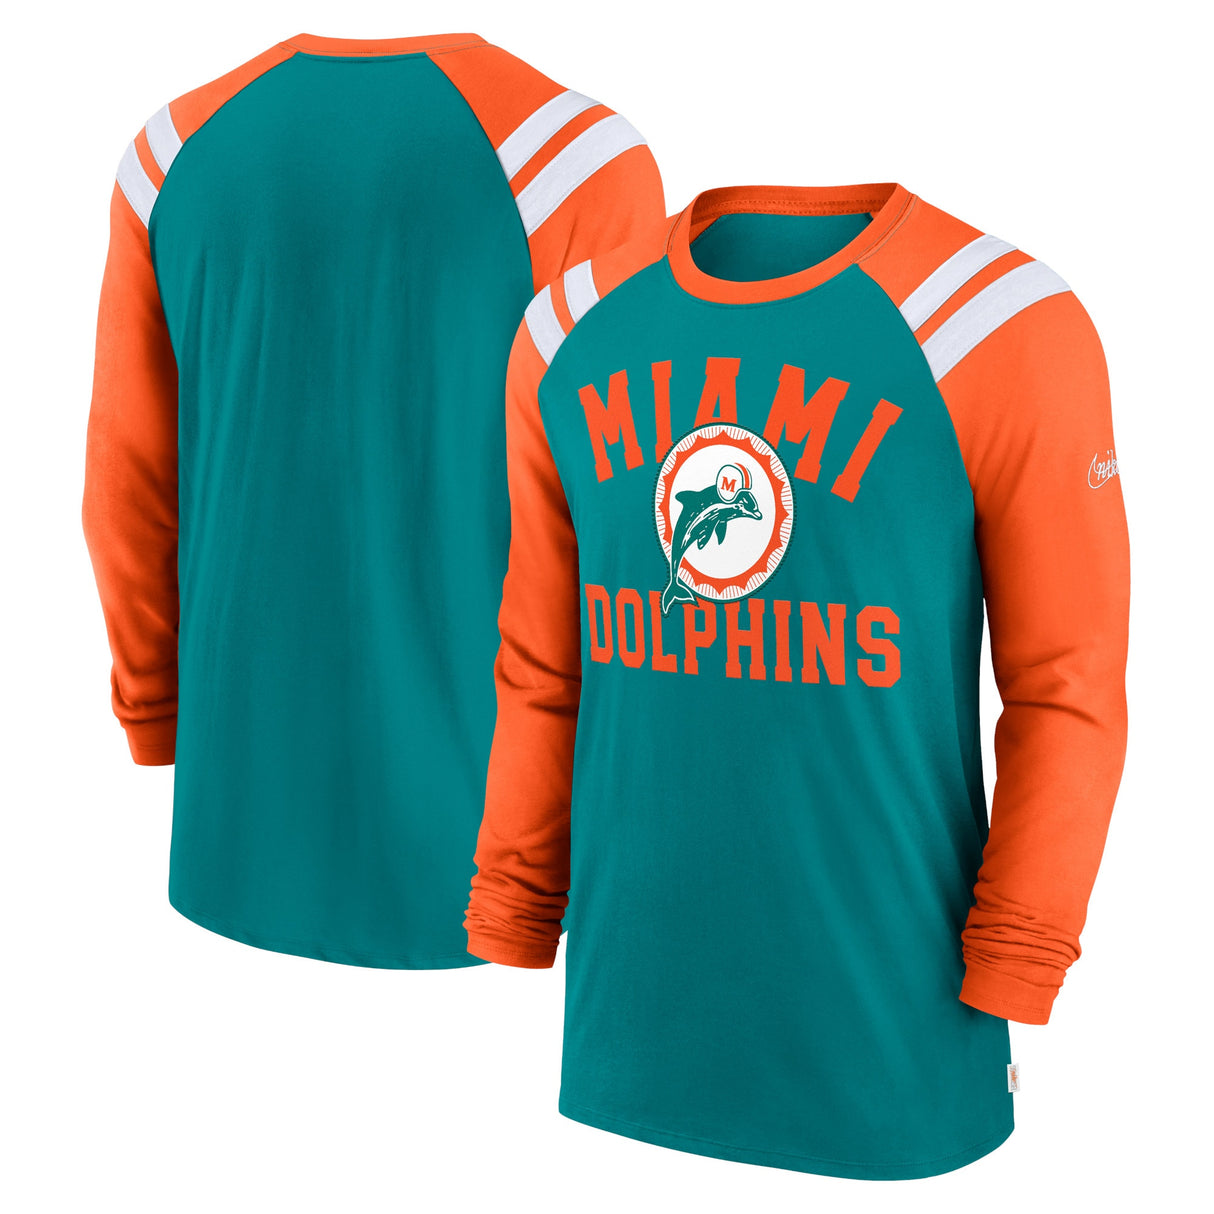 Dolphins Nike T-Shirts